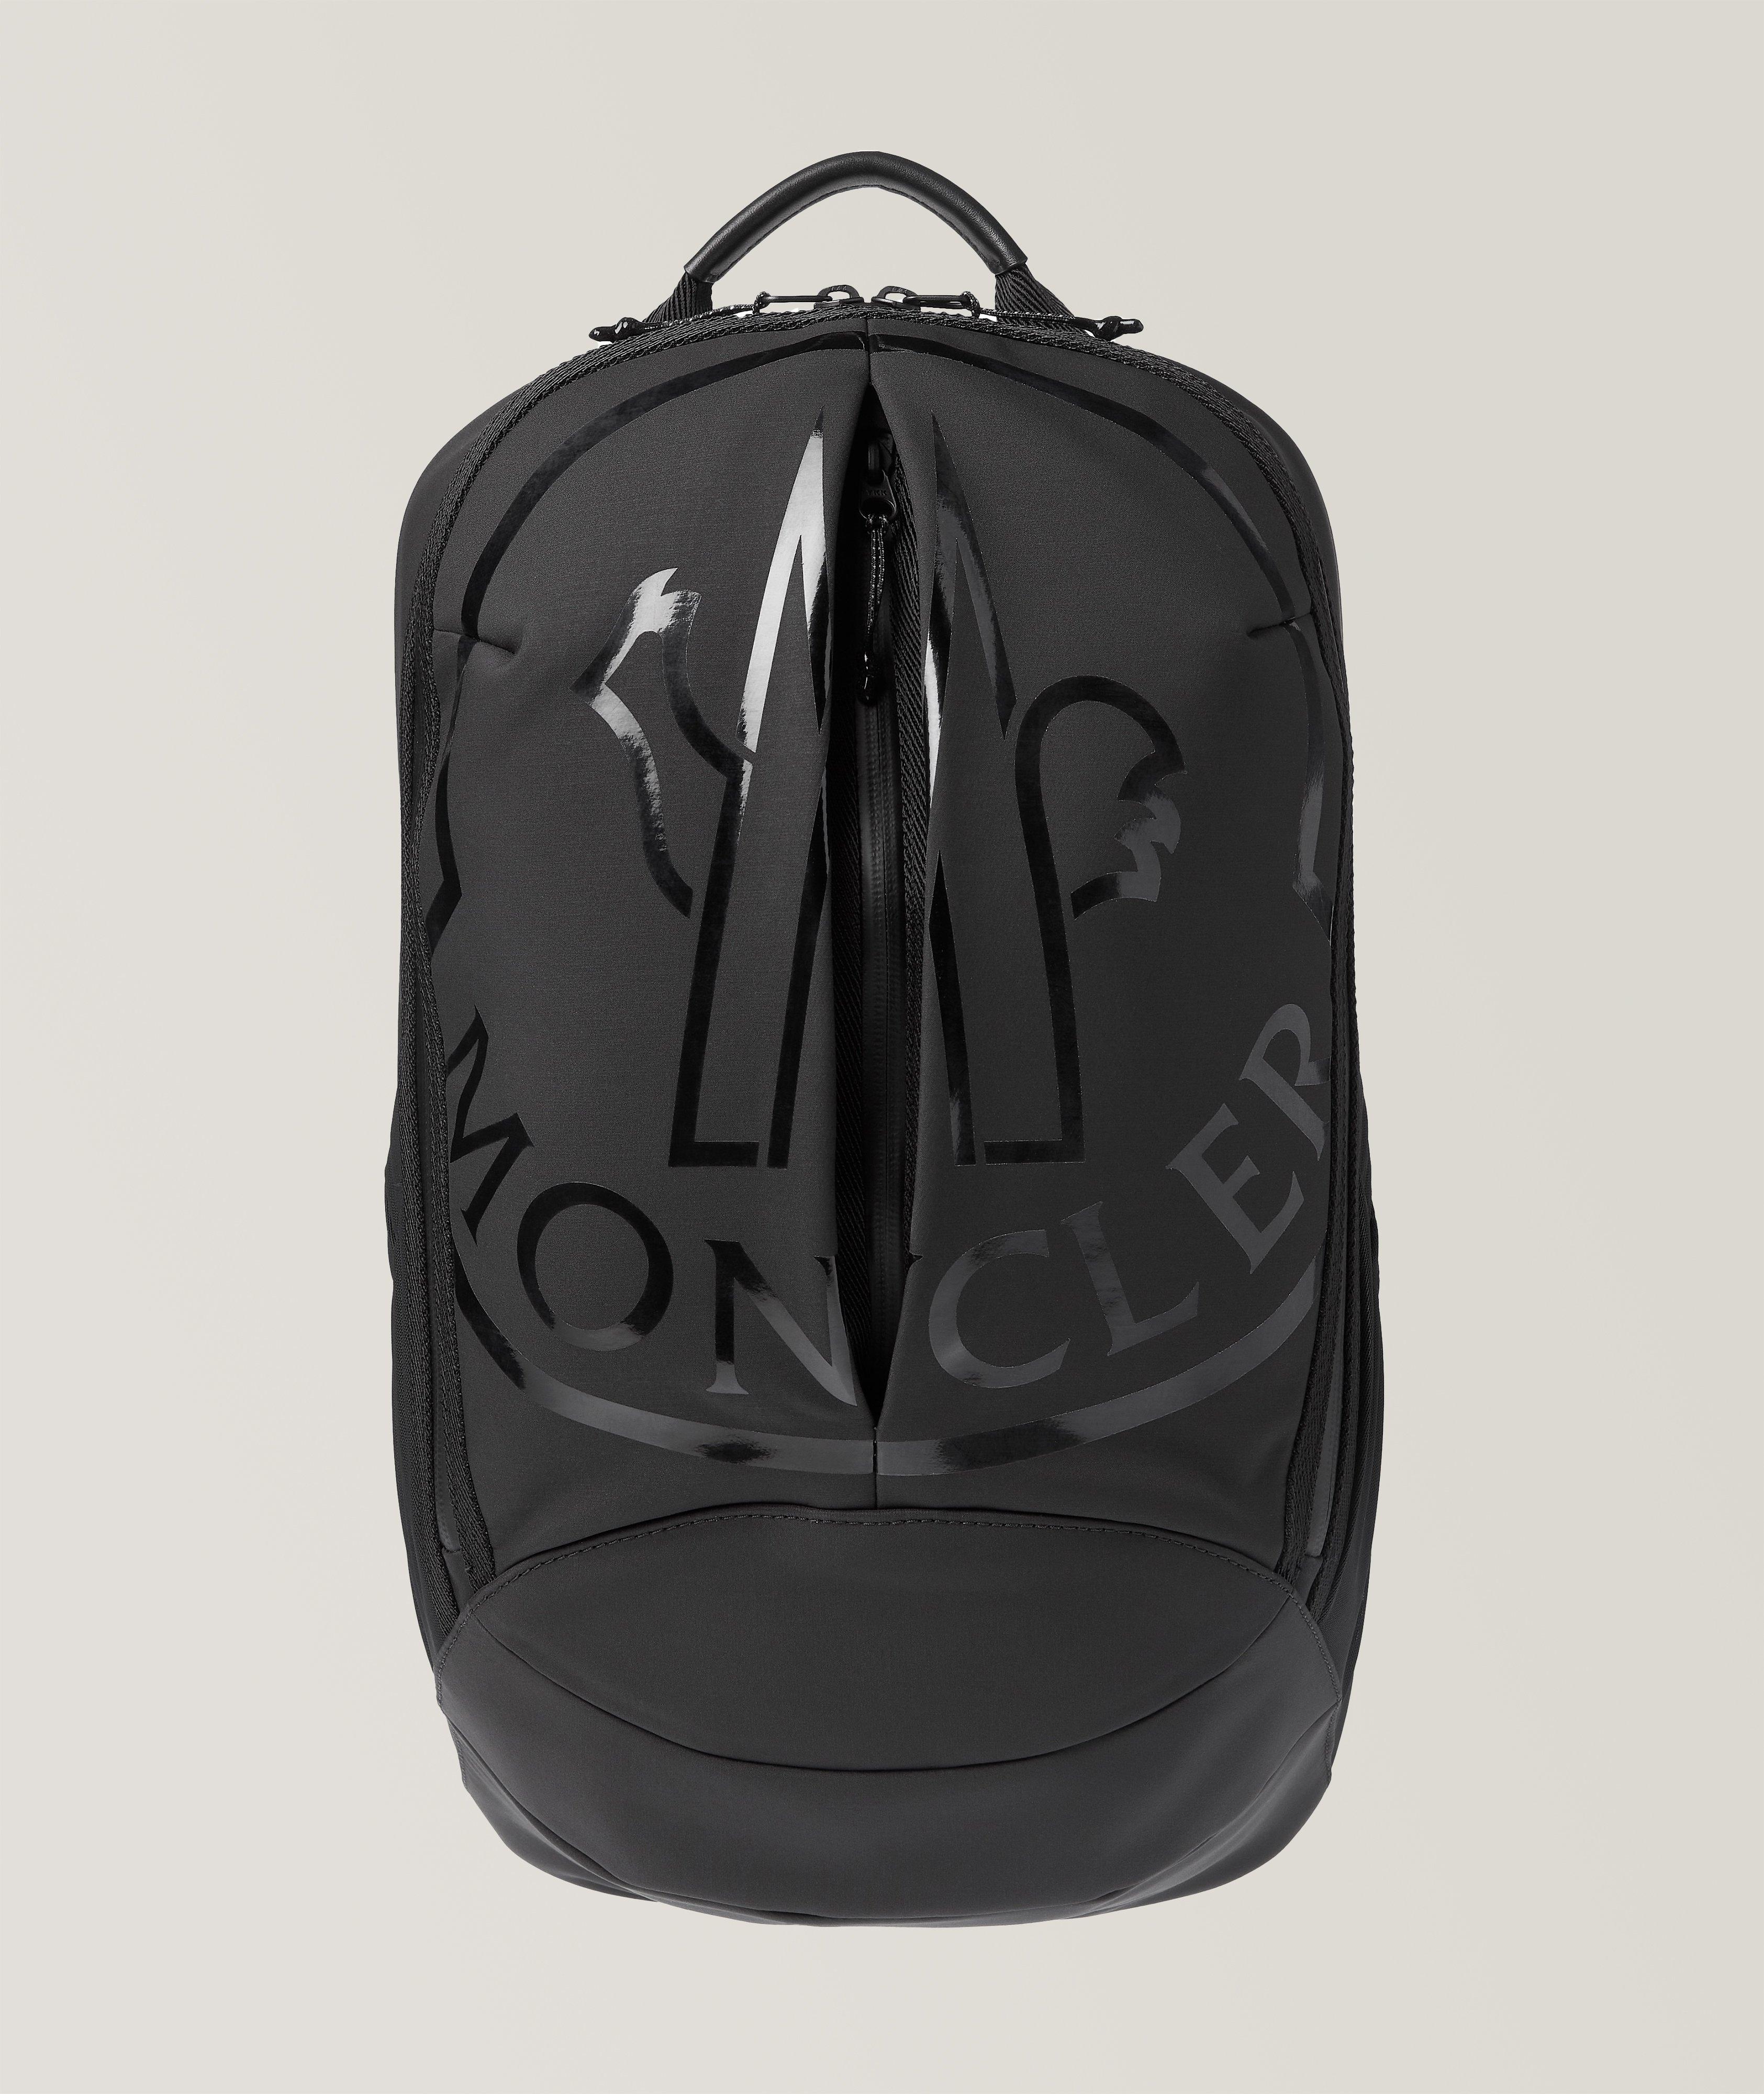 Logo Embroidered Cut Backpack image 0